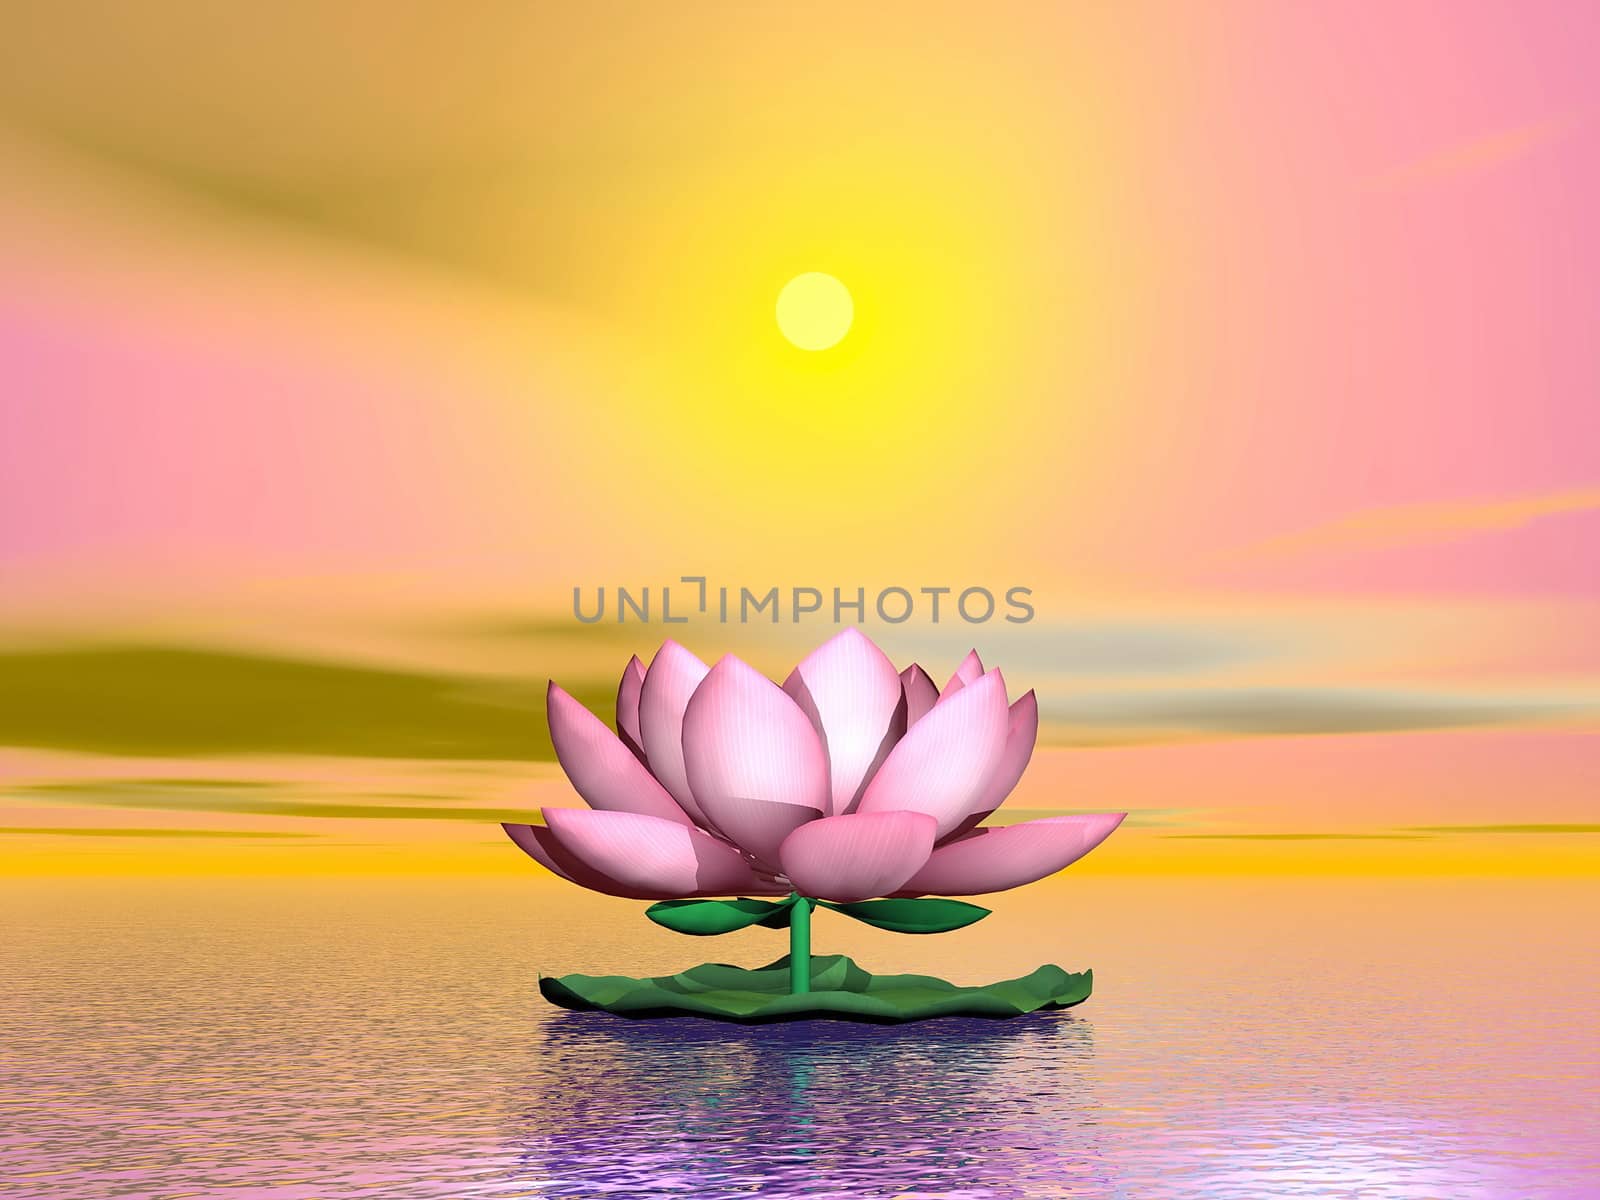 Lotus flower by sunset - 3D render by Elenaphotos21